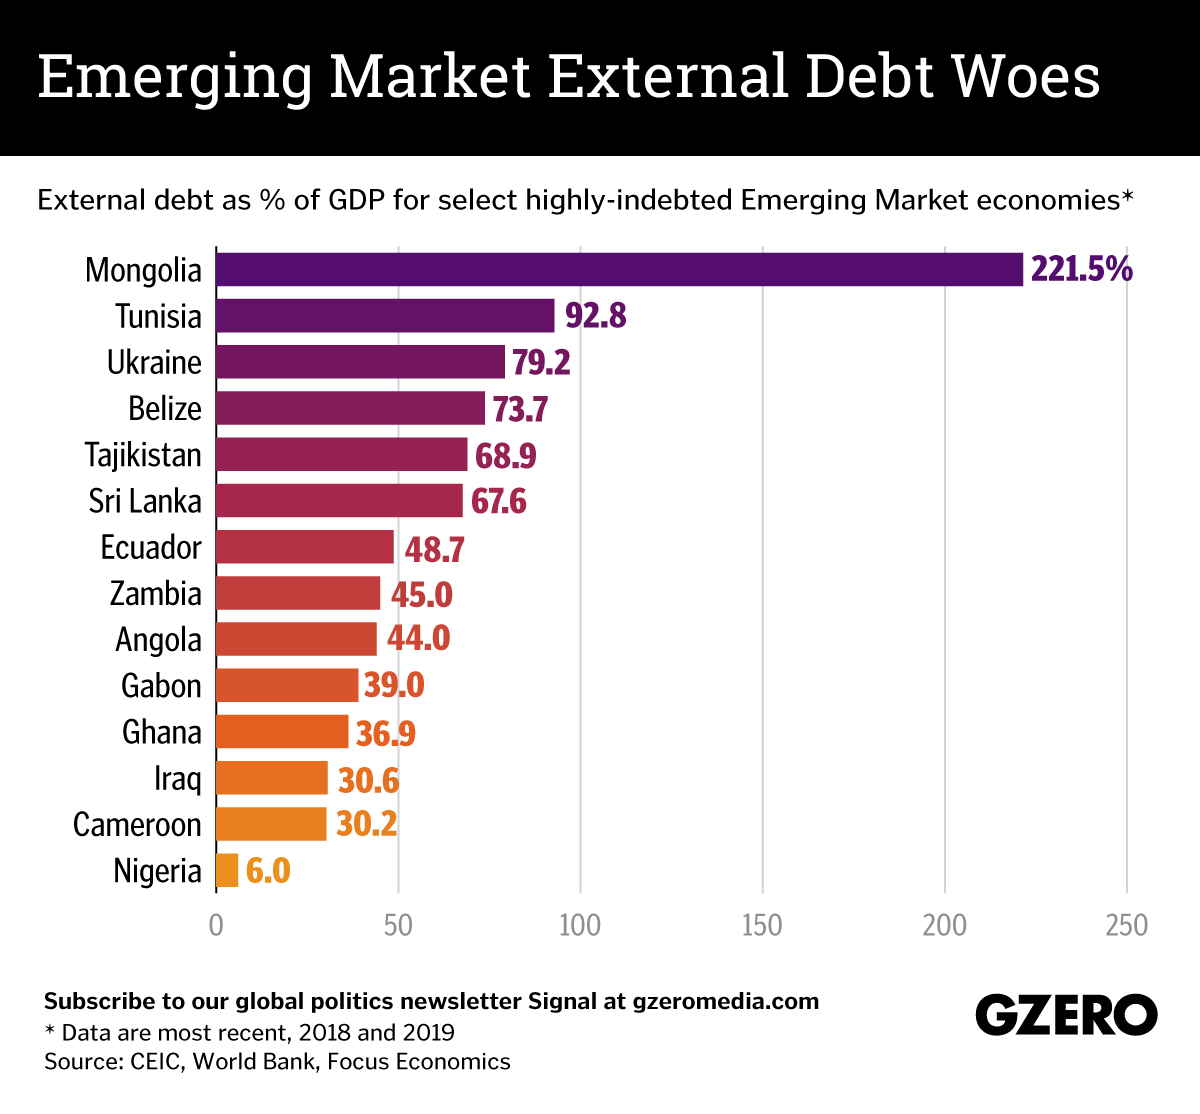 The Graphic Truth: Emerging market external debt woes